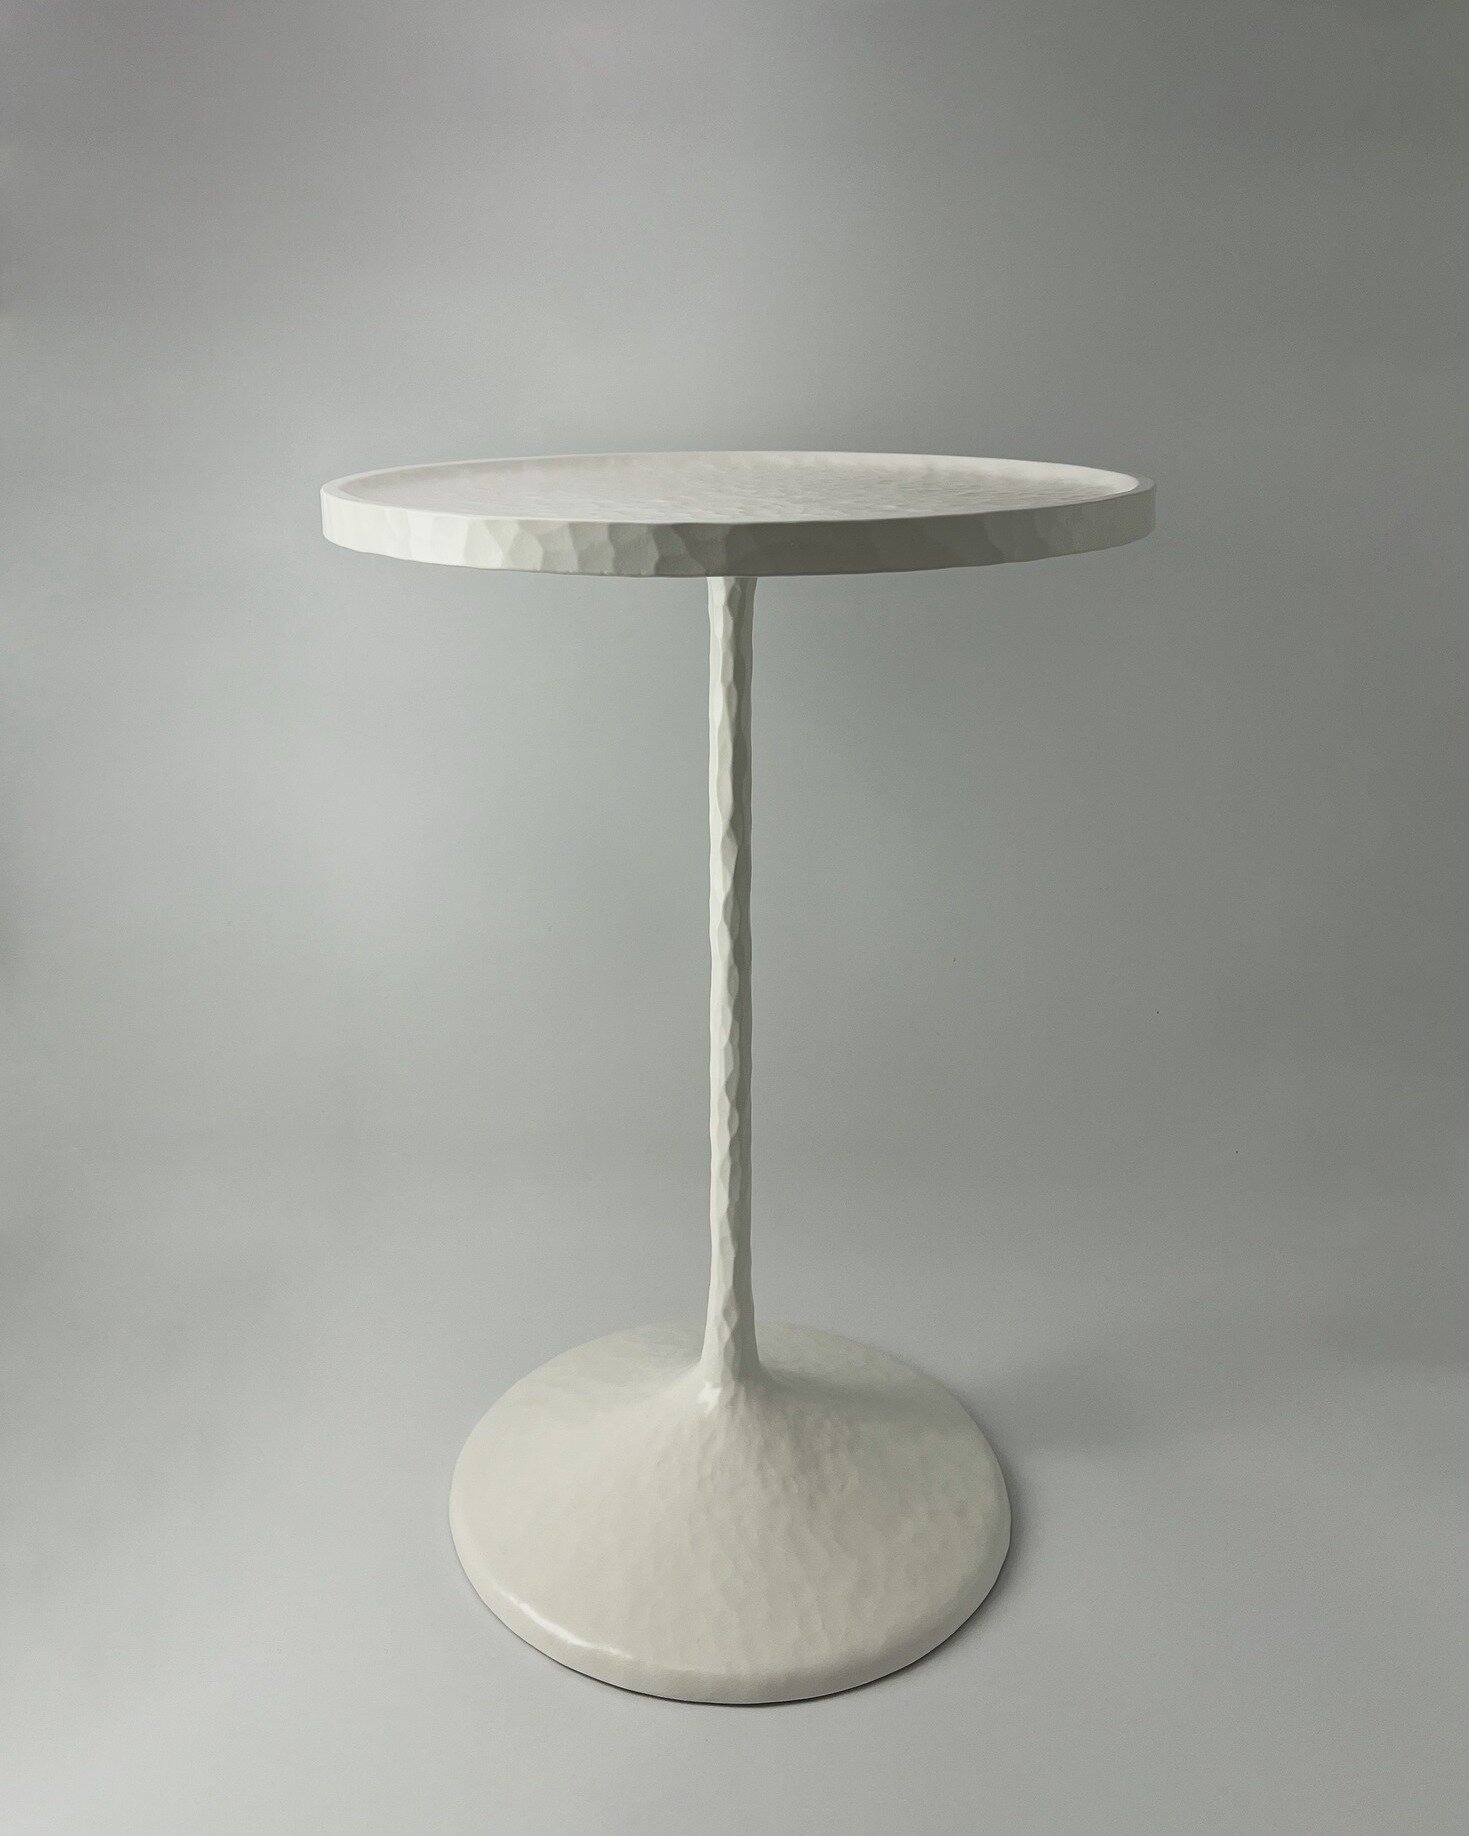 WINTER WHITE. Our 'Ariel' side table in the white lacquered finish.

Handmade in Switzerland by our skilled artisan partners. The steel surface is carefully hammered by hand to achieve its unique texture. You'll immediately sense the high quality the